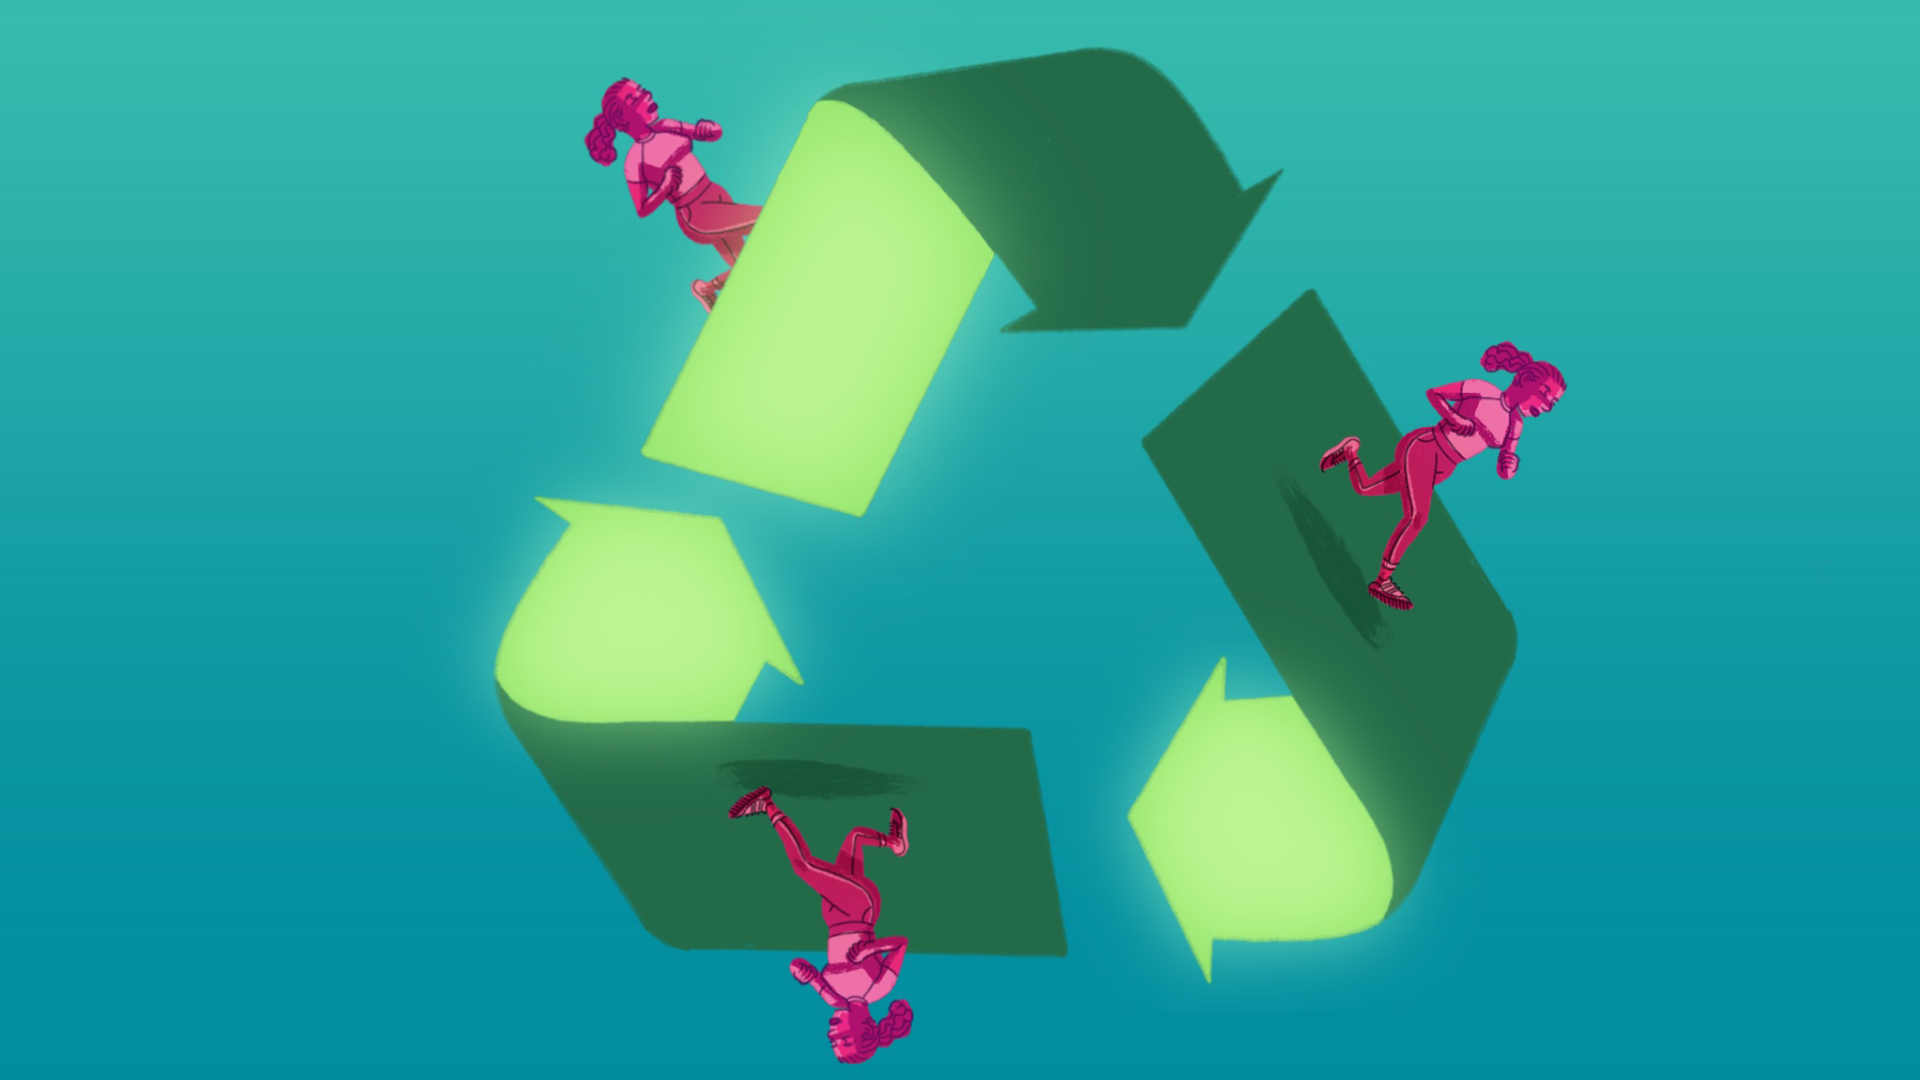 An illustration of a recycling symbol with people walking on top of it.